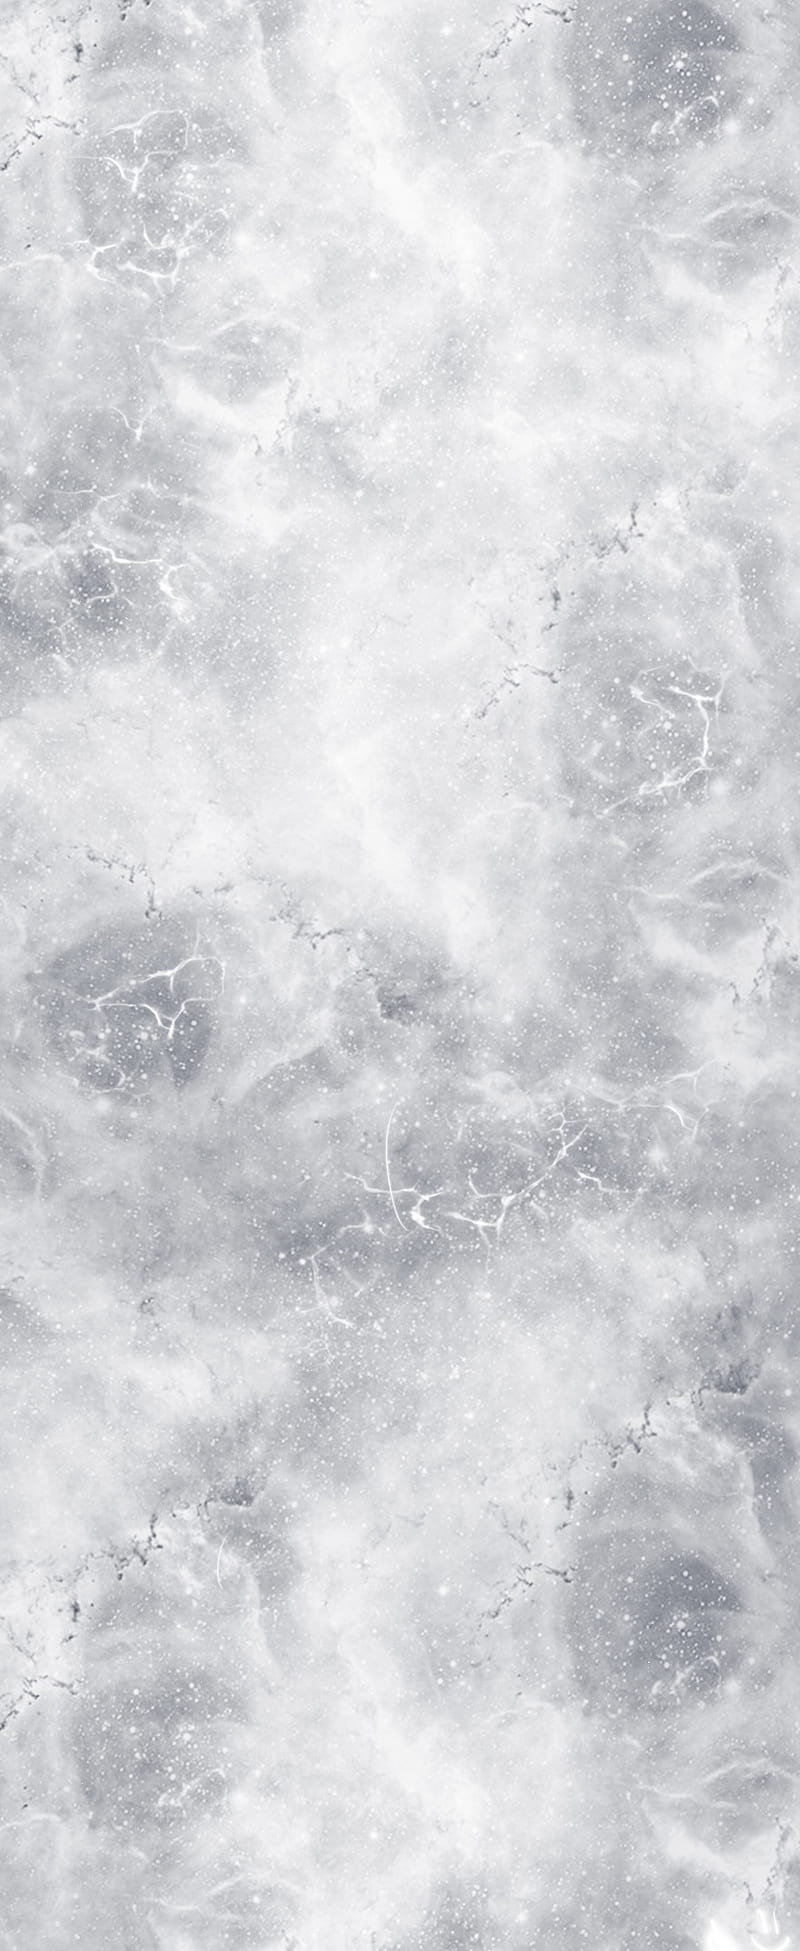 A grey marble background with white and grey veins - White, cute white